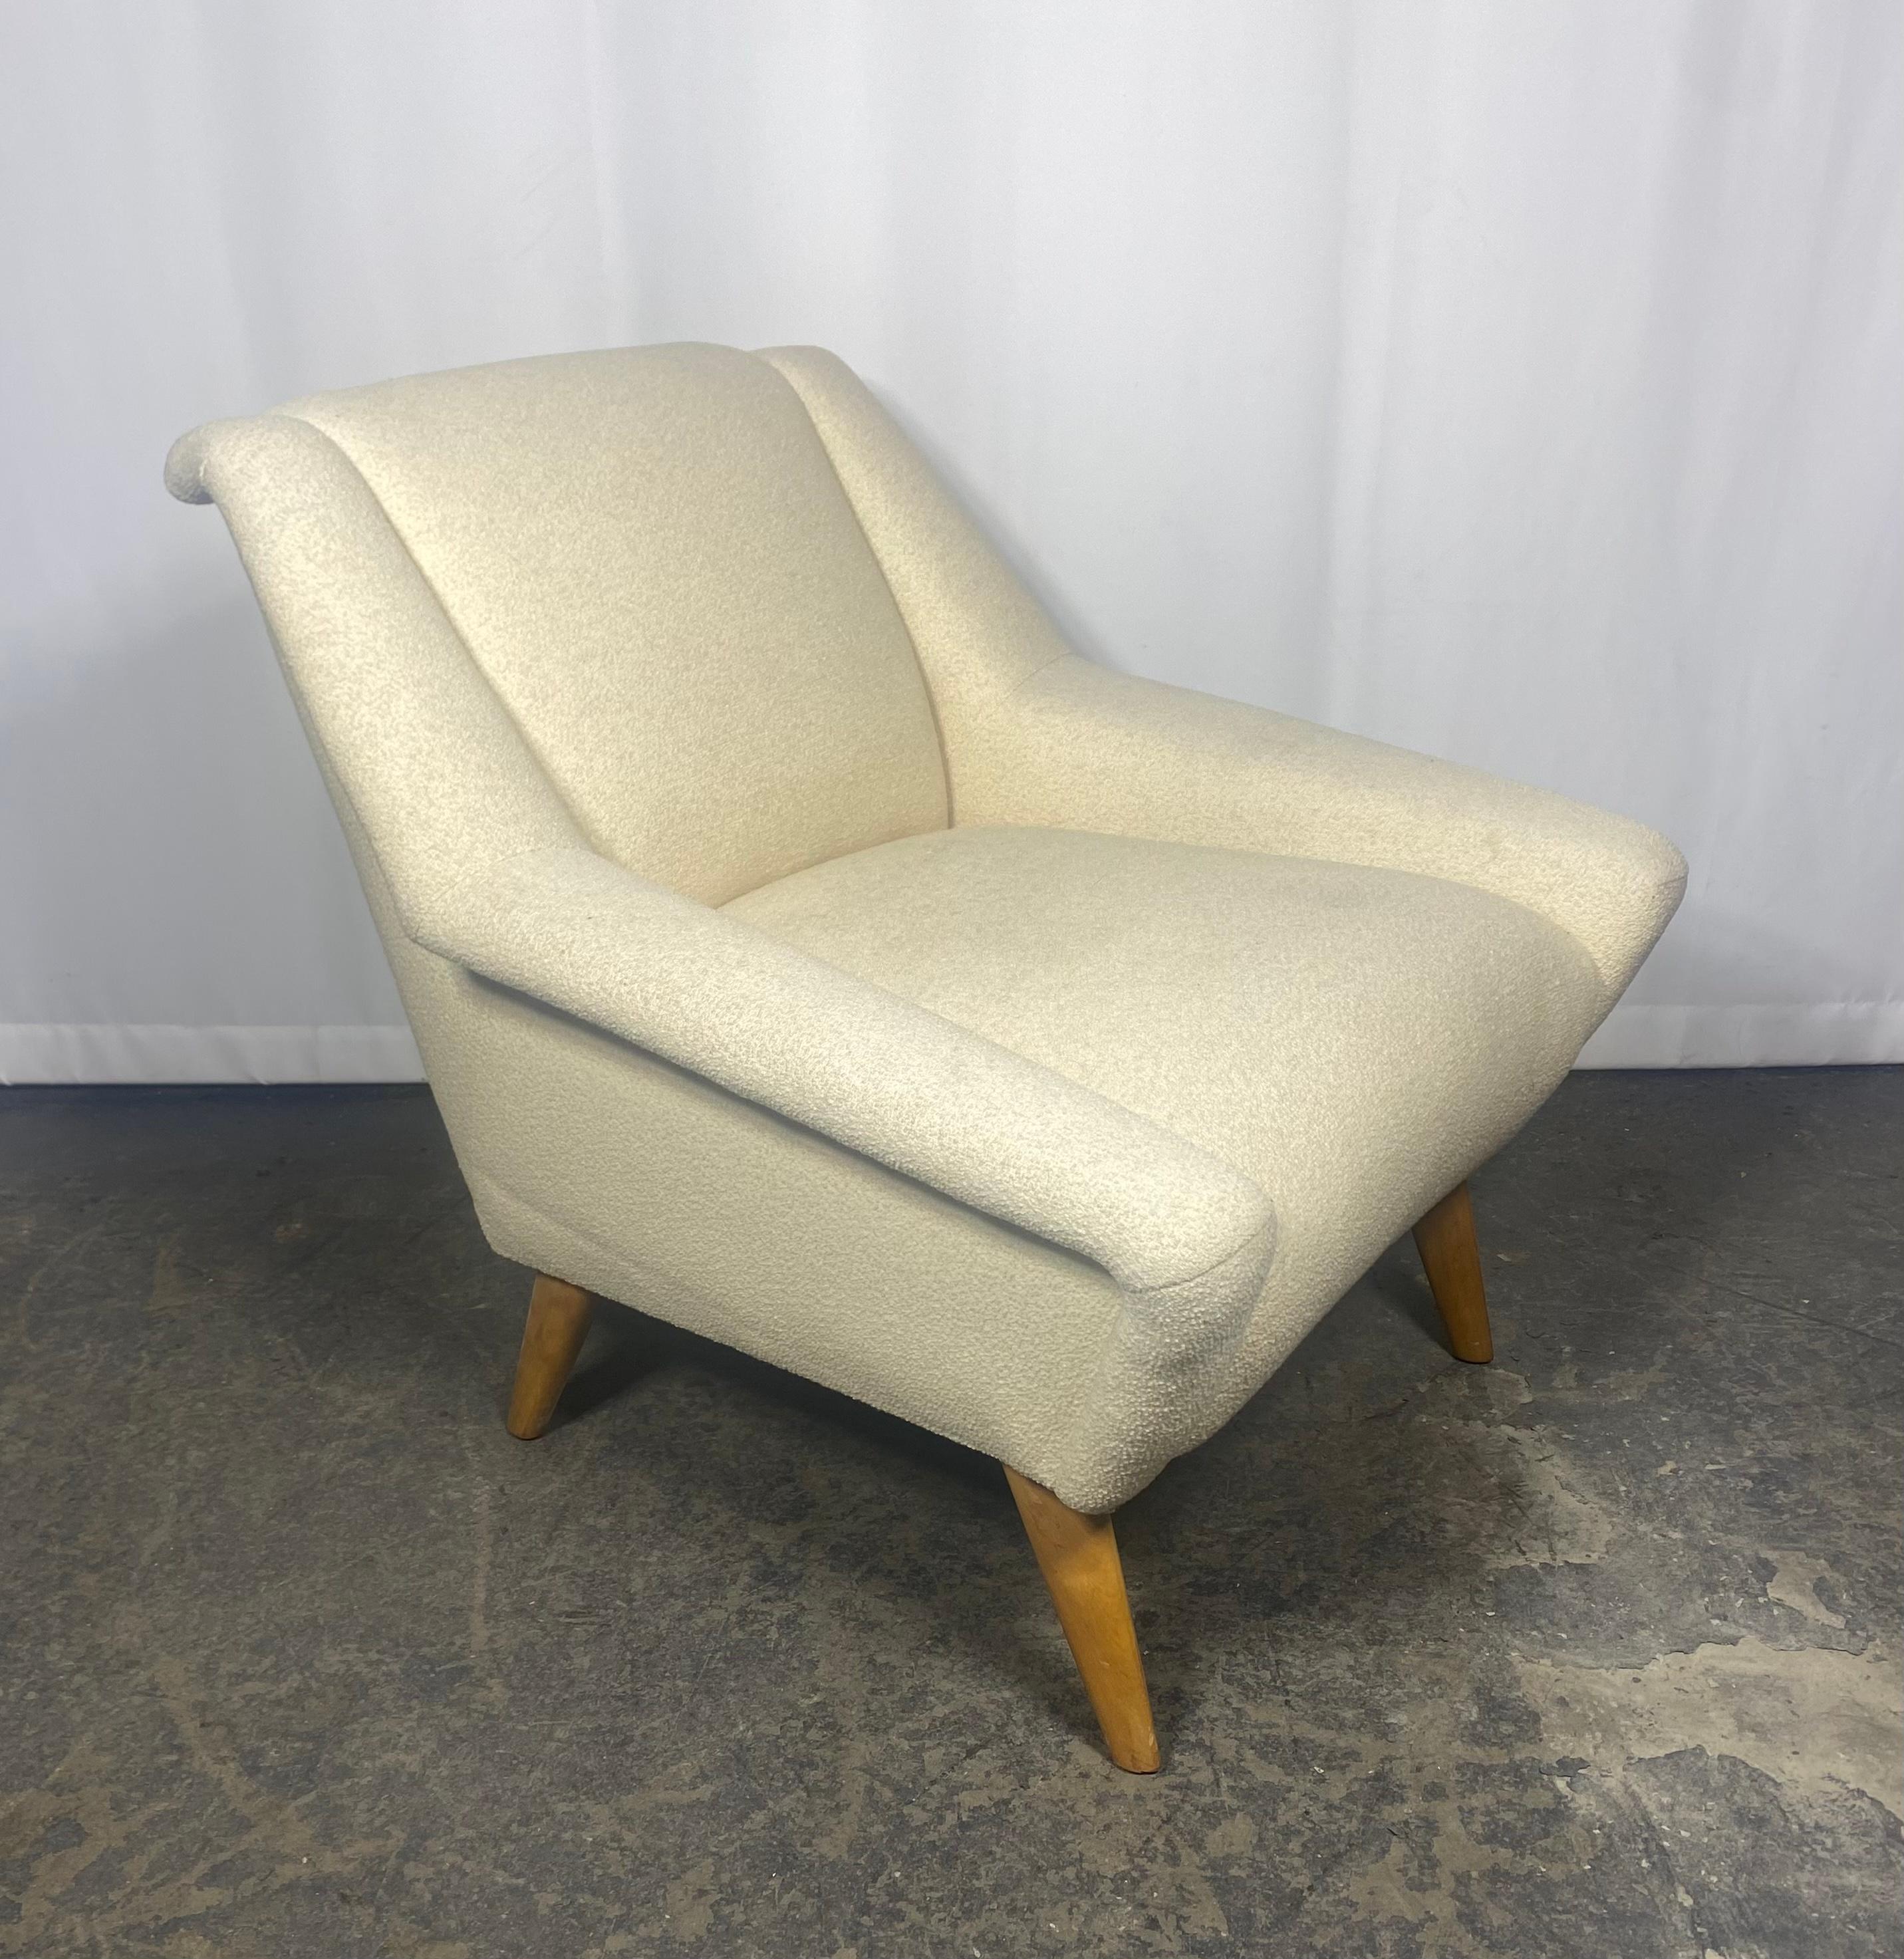 Classic Modernist Lounge Chair by Heywood Wakefield , Reminiscent of amazing designed chairs by Gio Ponti. Angular solid birch wood legs.Recently reupholstered in a nice cream /off white boucle fabric,, Extremely comfortable,Hand delivery avail to